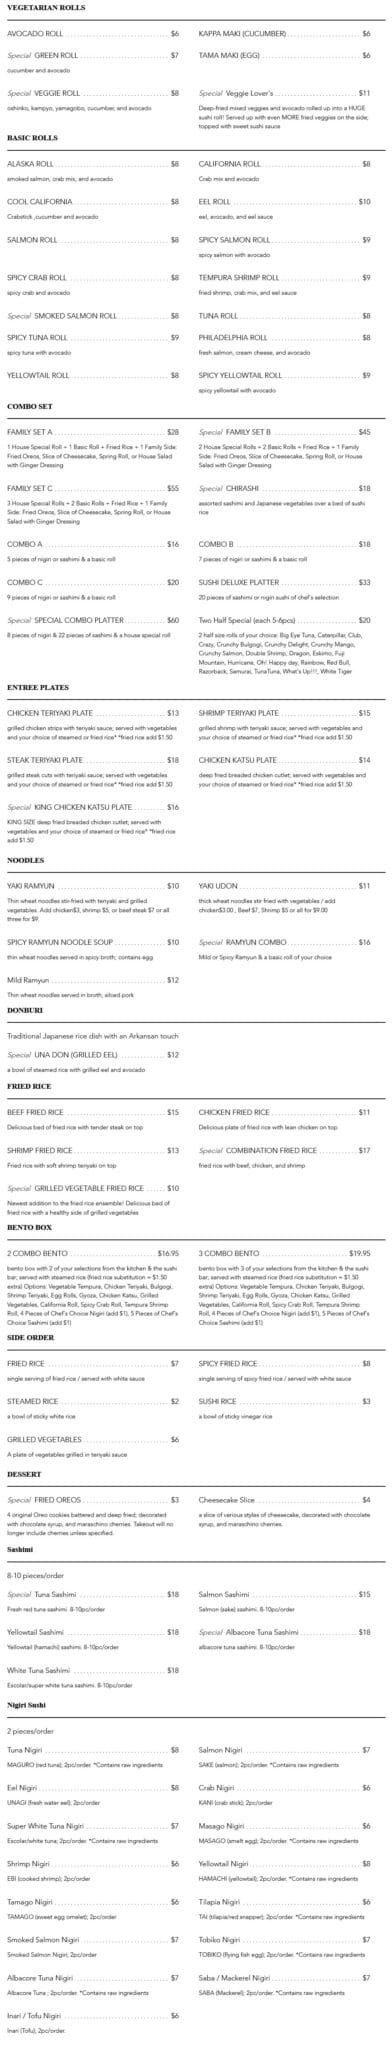 Osaka Sushi - Rogers - Menu with Prices